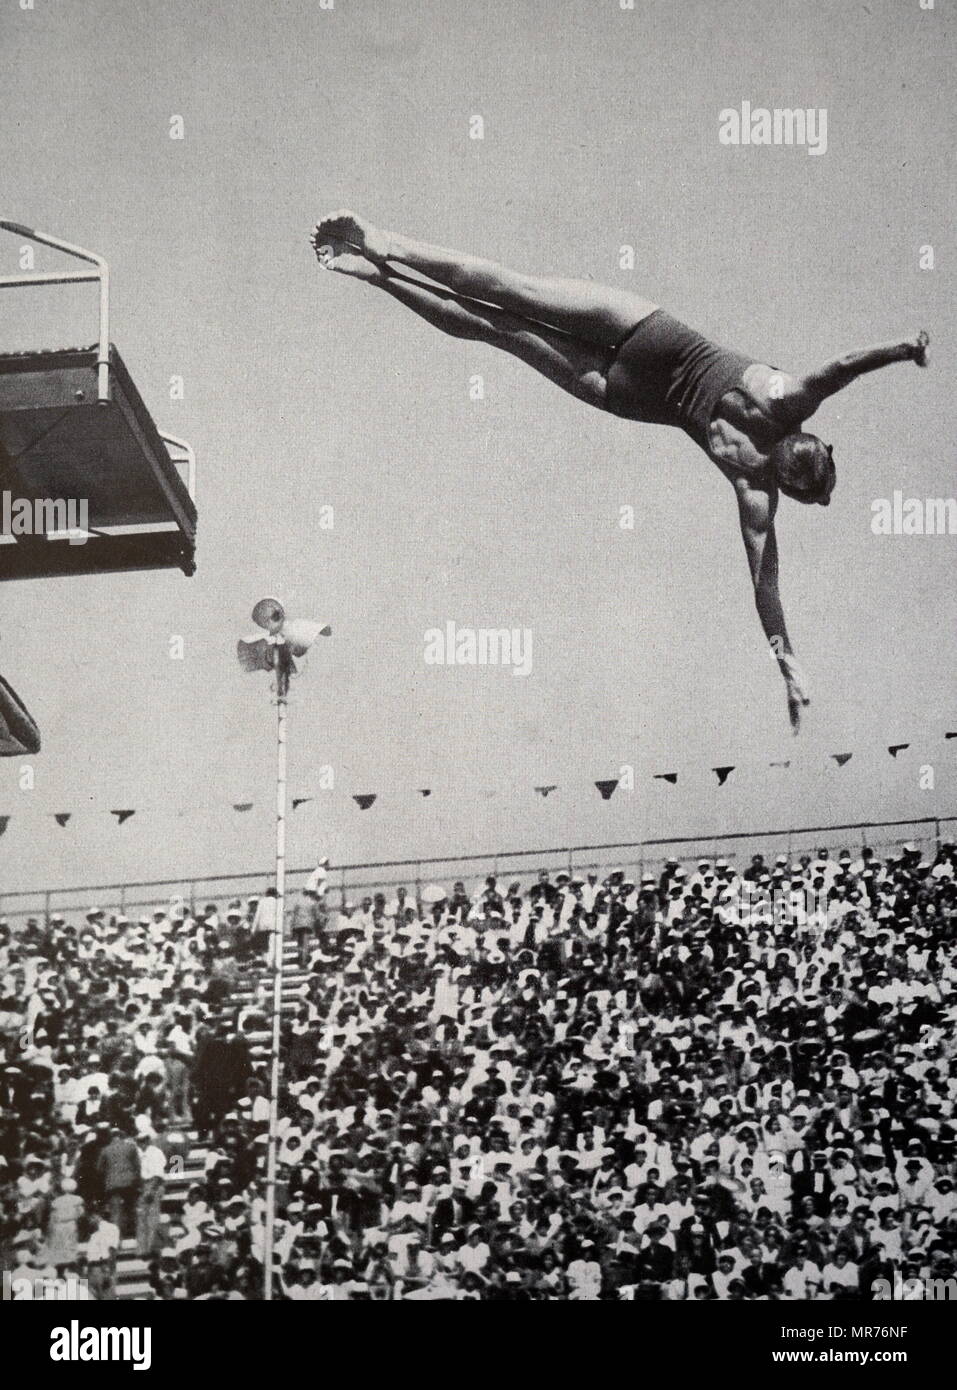 Photograph of Katherine Louise Rawls (1917 - 1982) in the springboard diving event at the 1932 Olympic games. Stock Photo